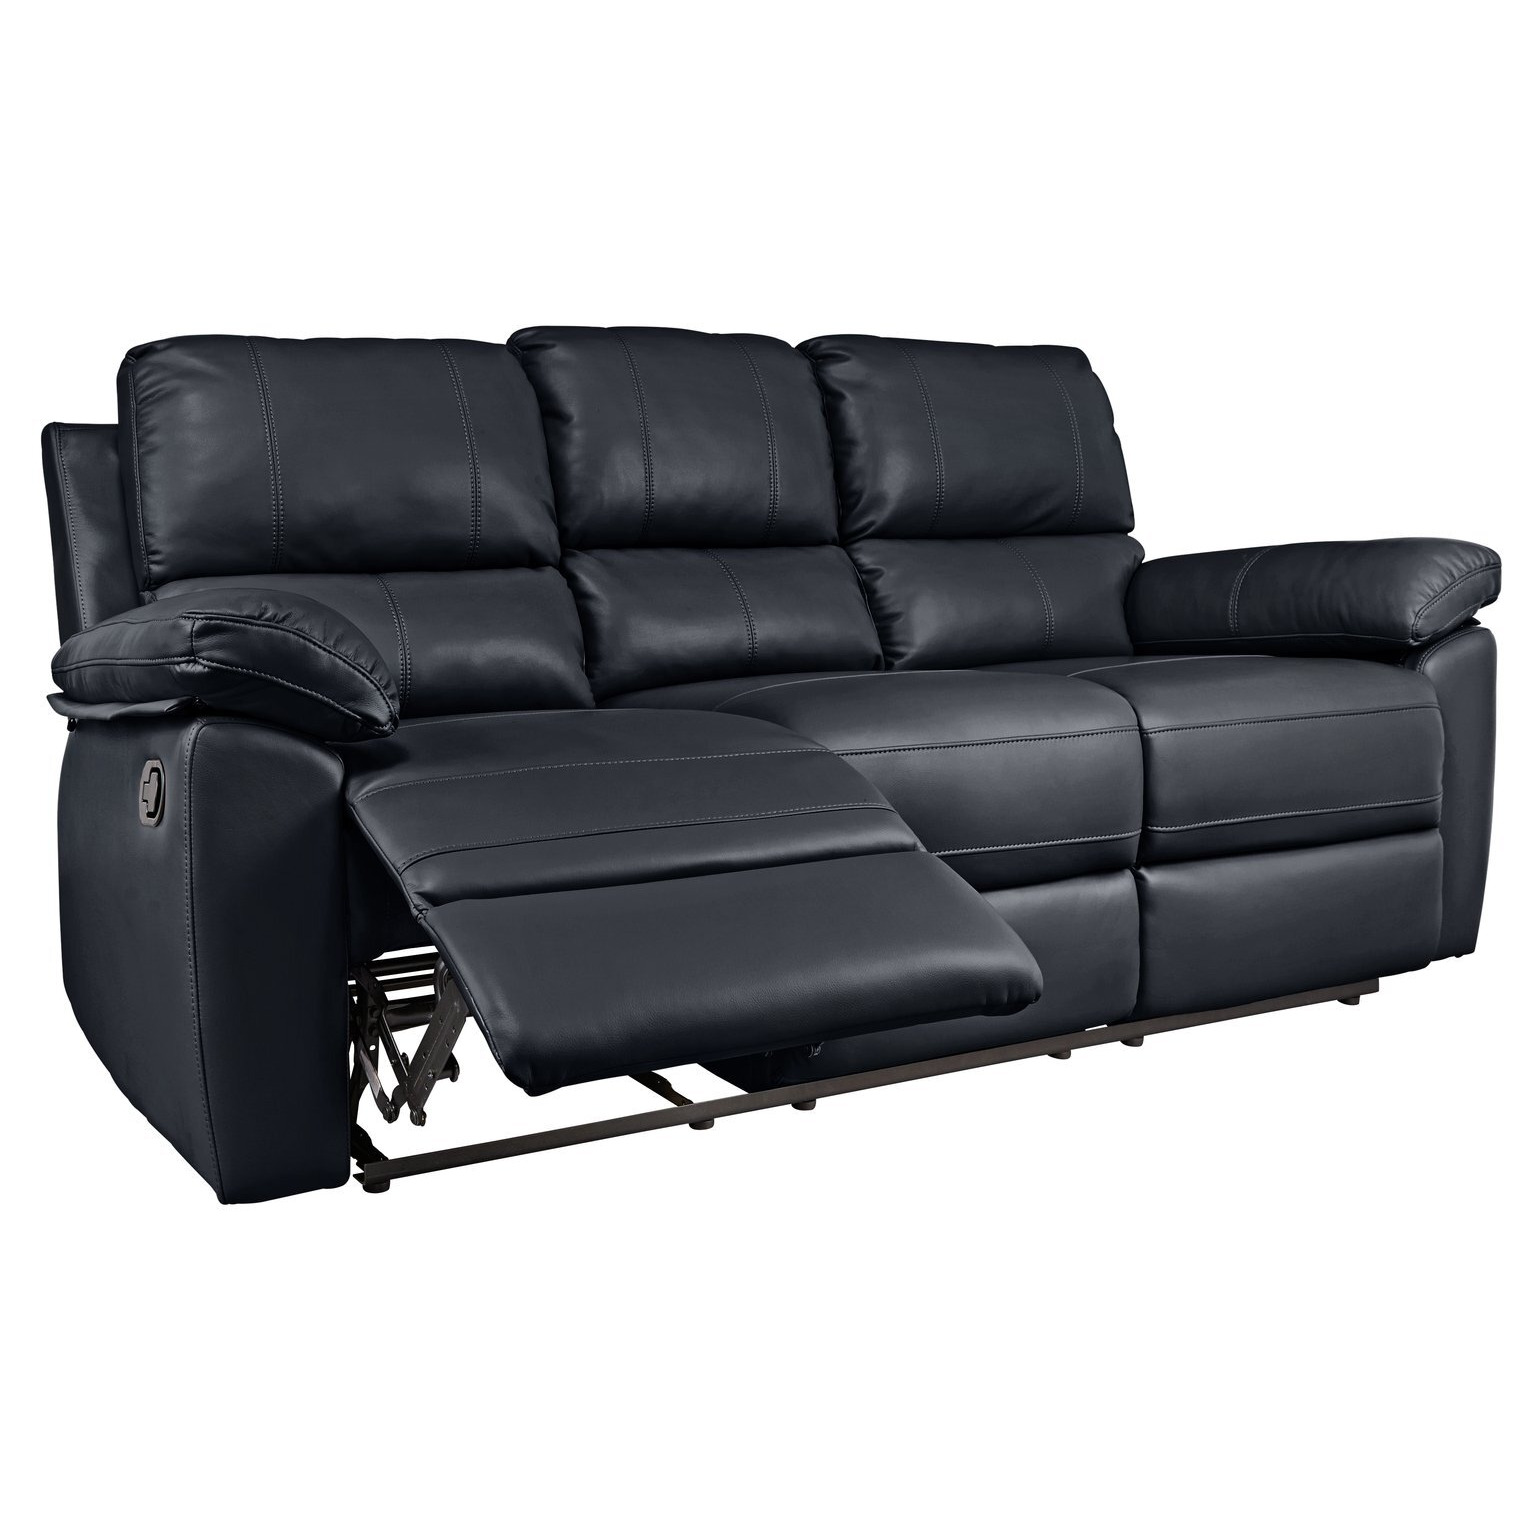 Argos Home Toby Faux Leather 3 Seater Recliner Sofa - Black - image 1